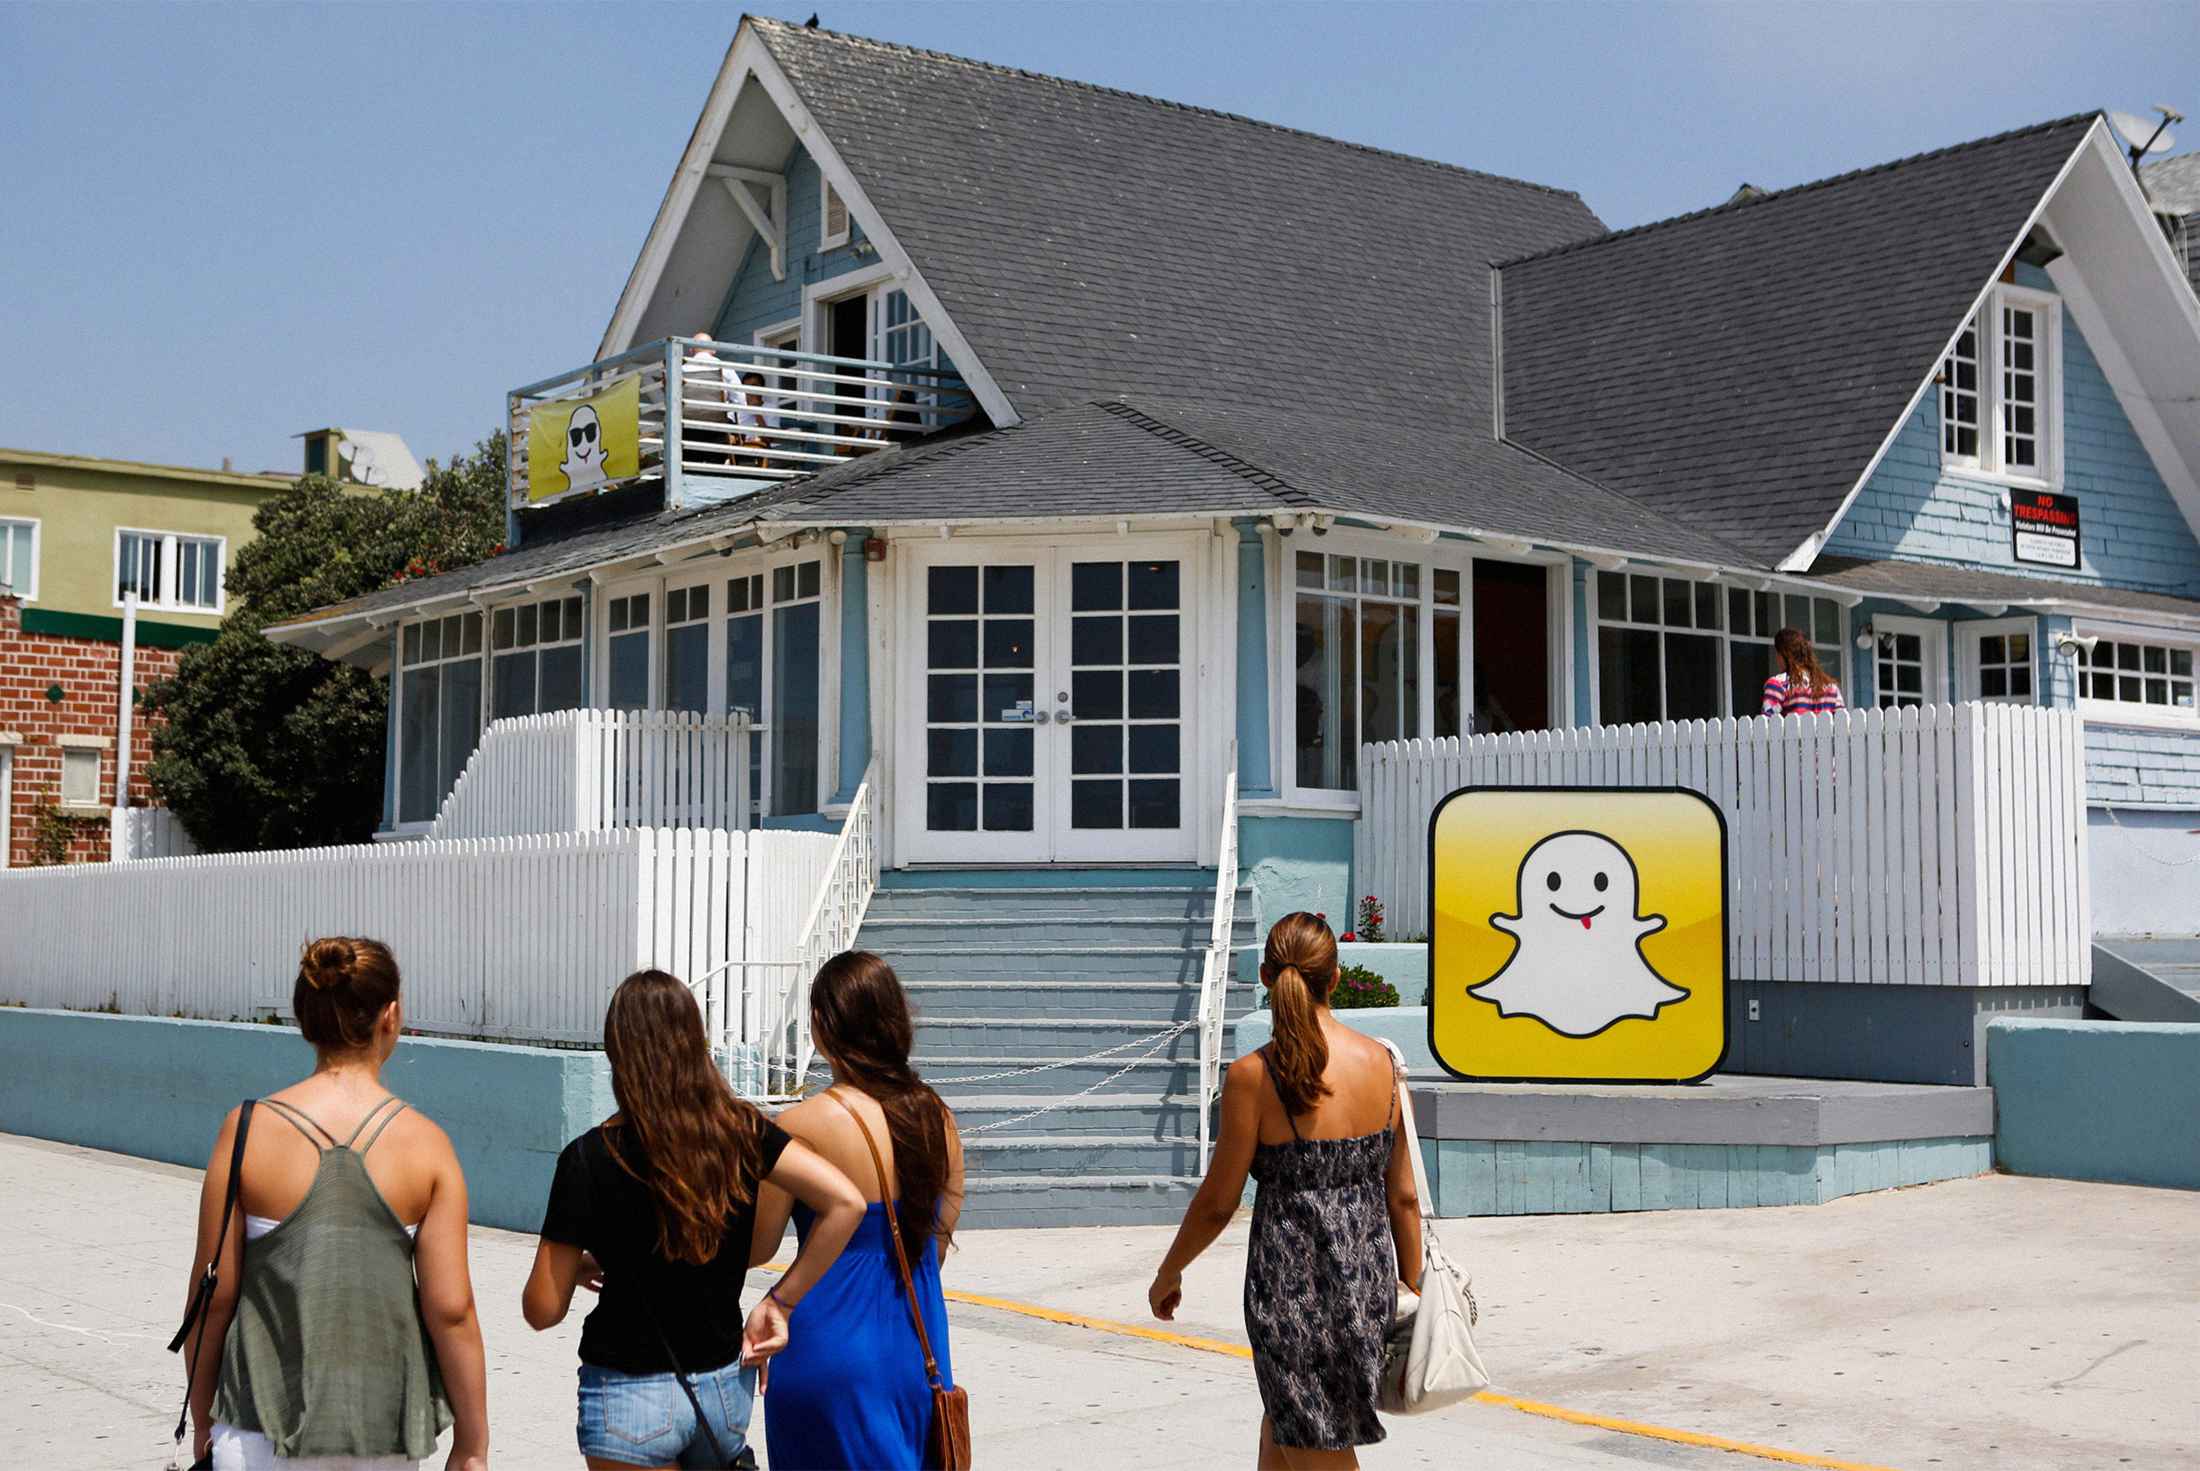 Just Toddler Porn - Snapchat Has a Child-Porn Problem - Bloomberg